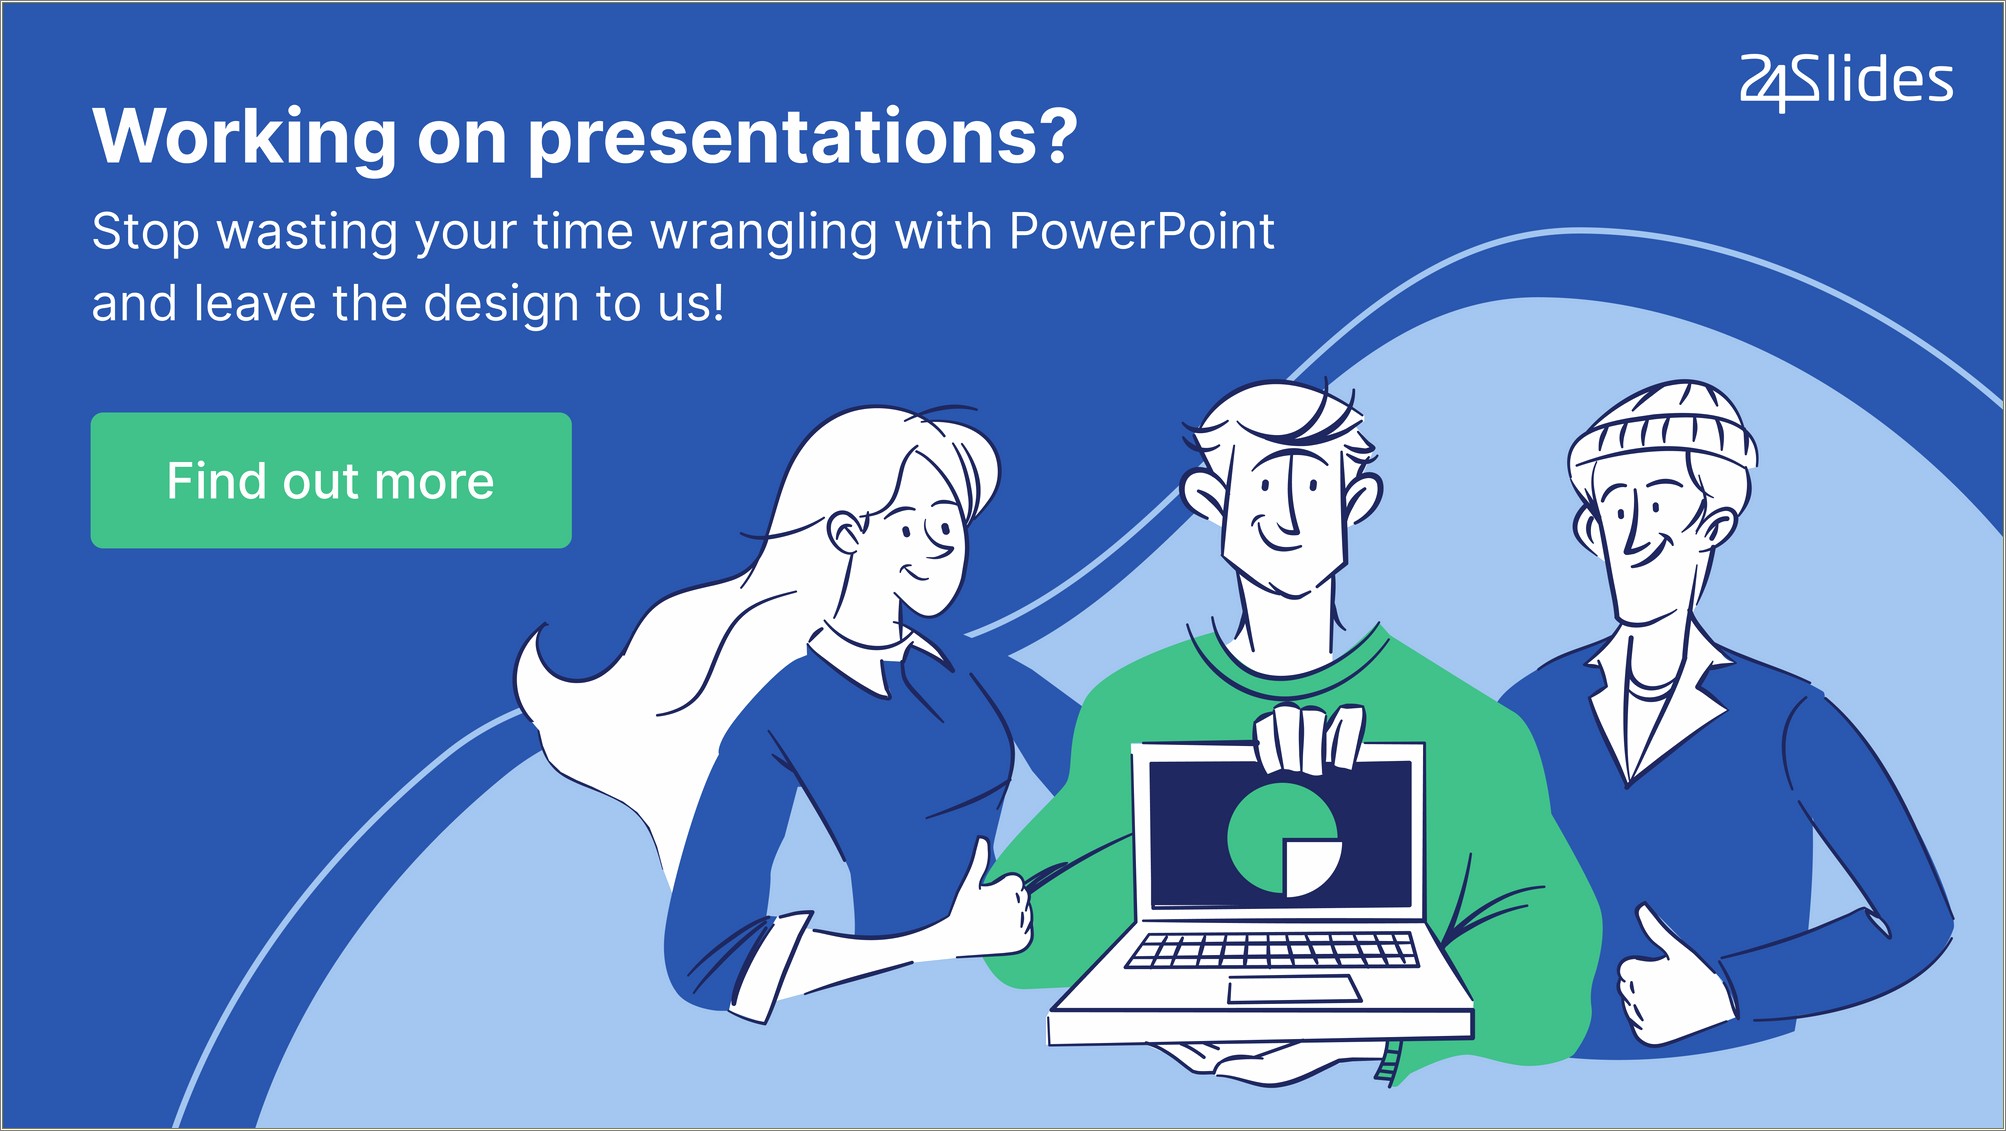 Creative Powerpoint Templates Free Download 2018